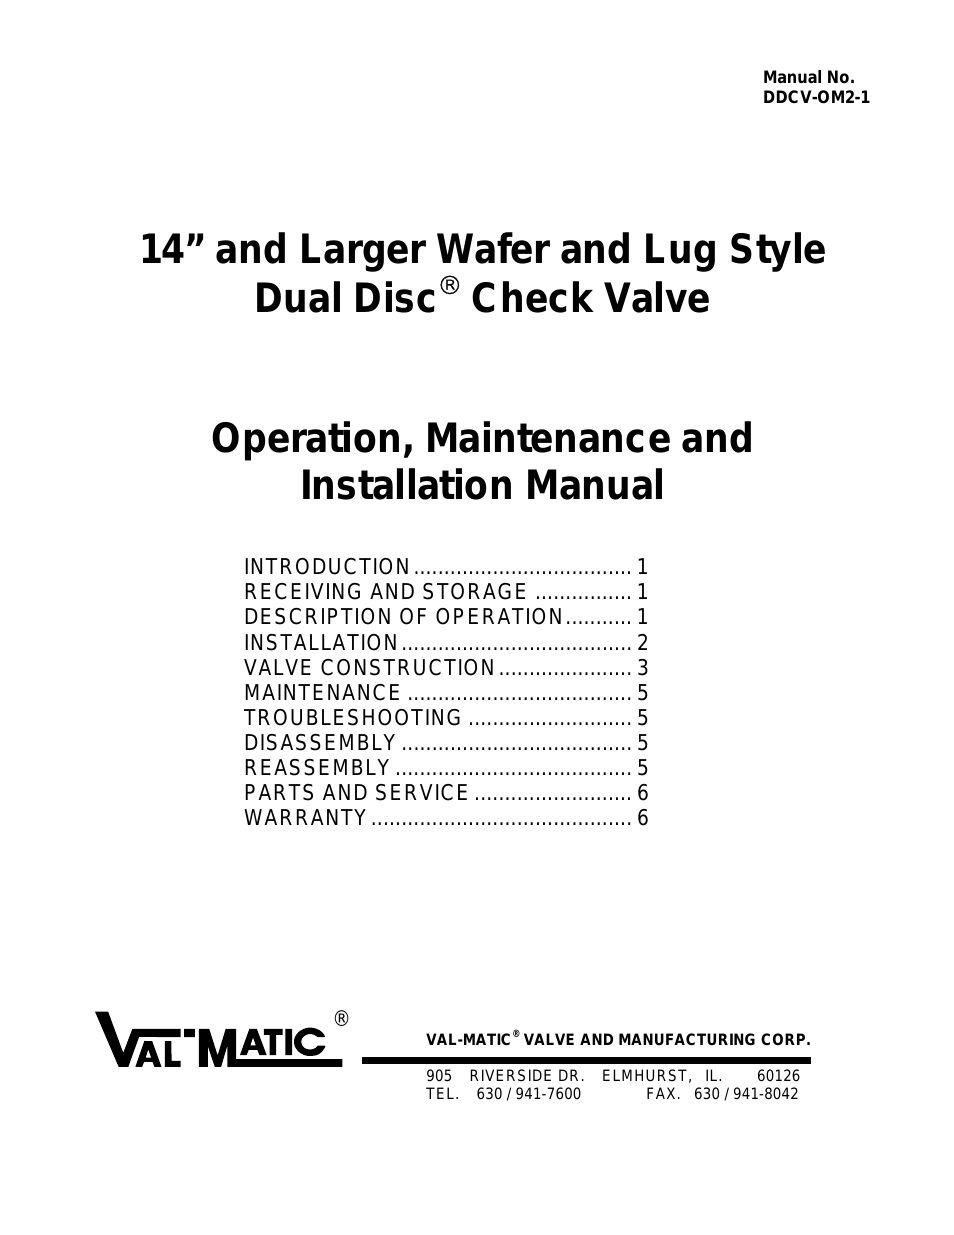 14 and Larger Wafer and Lug Style Dual Disc Check Valve